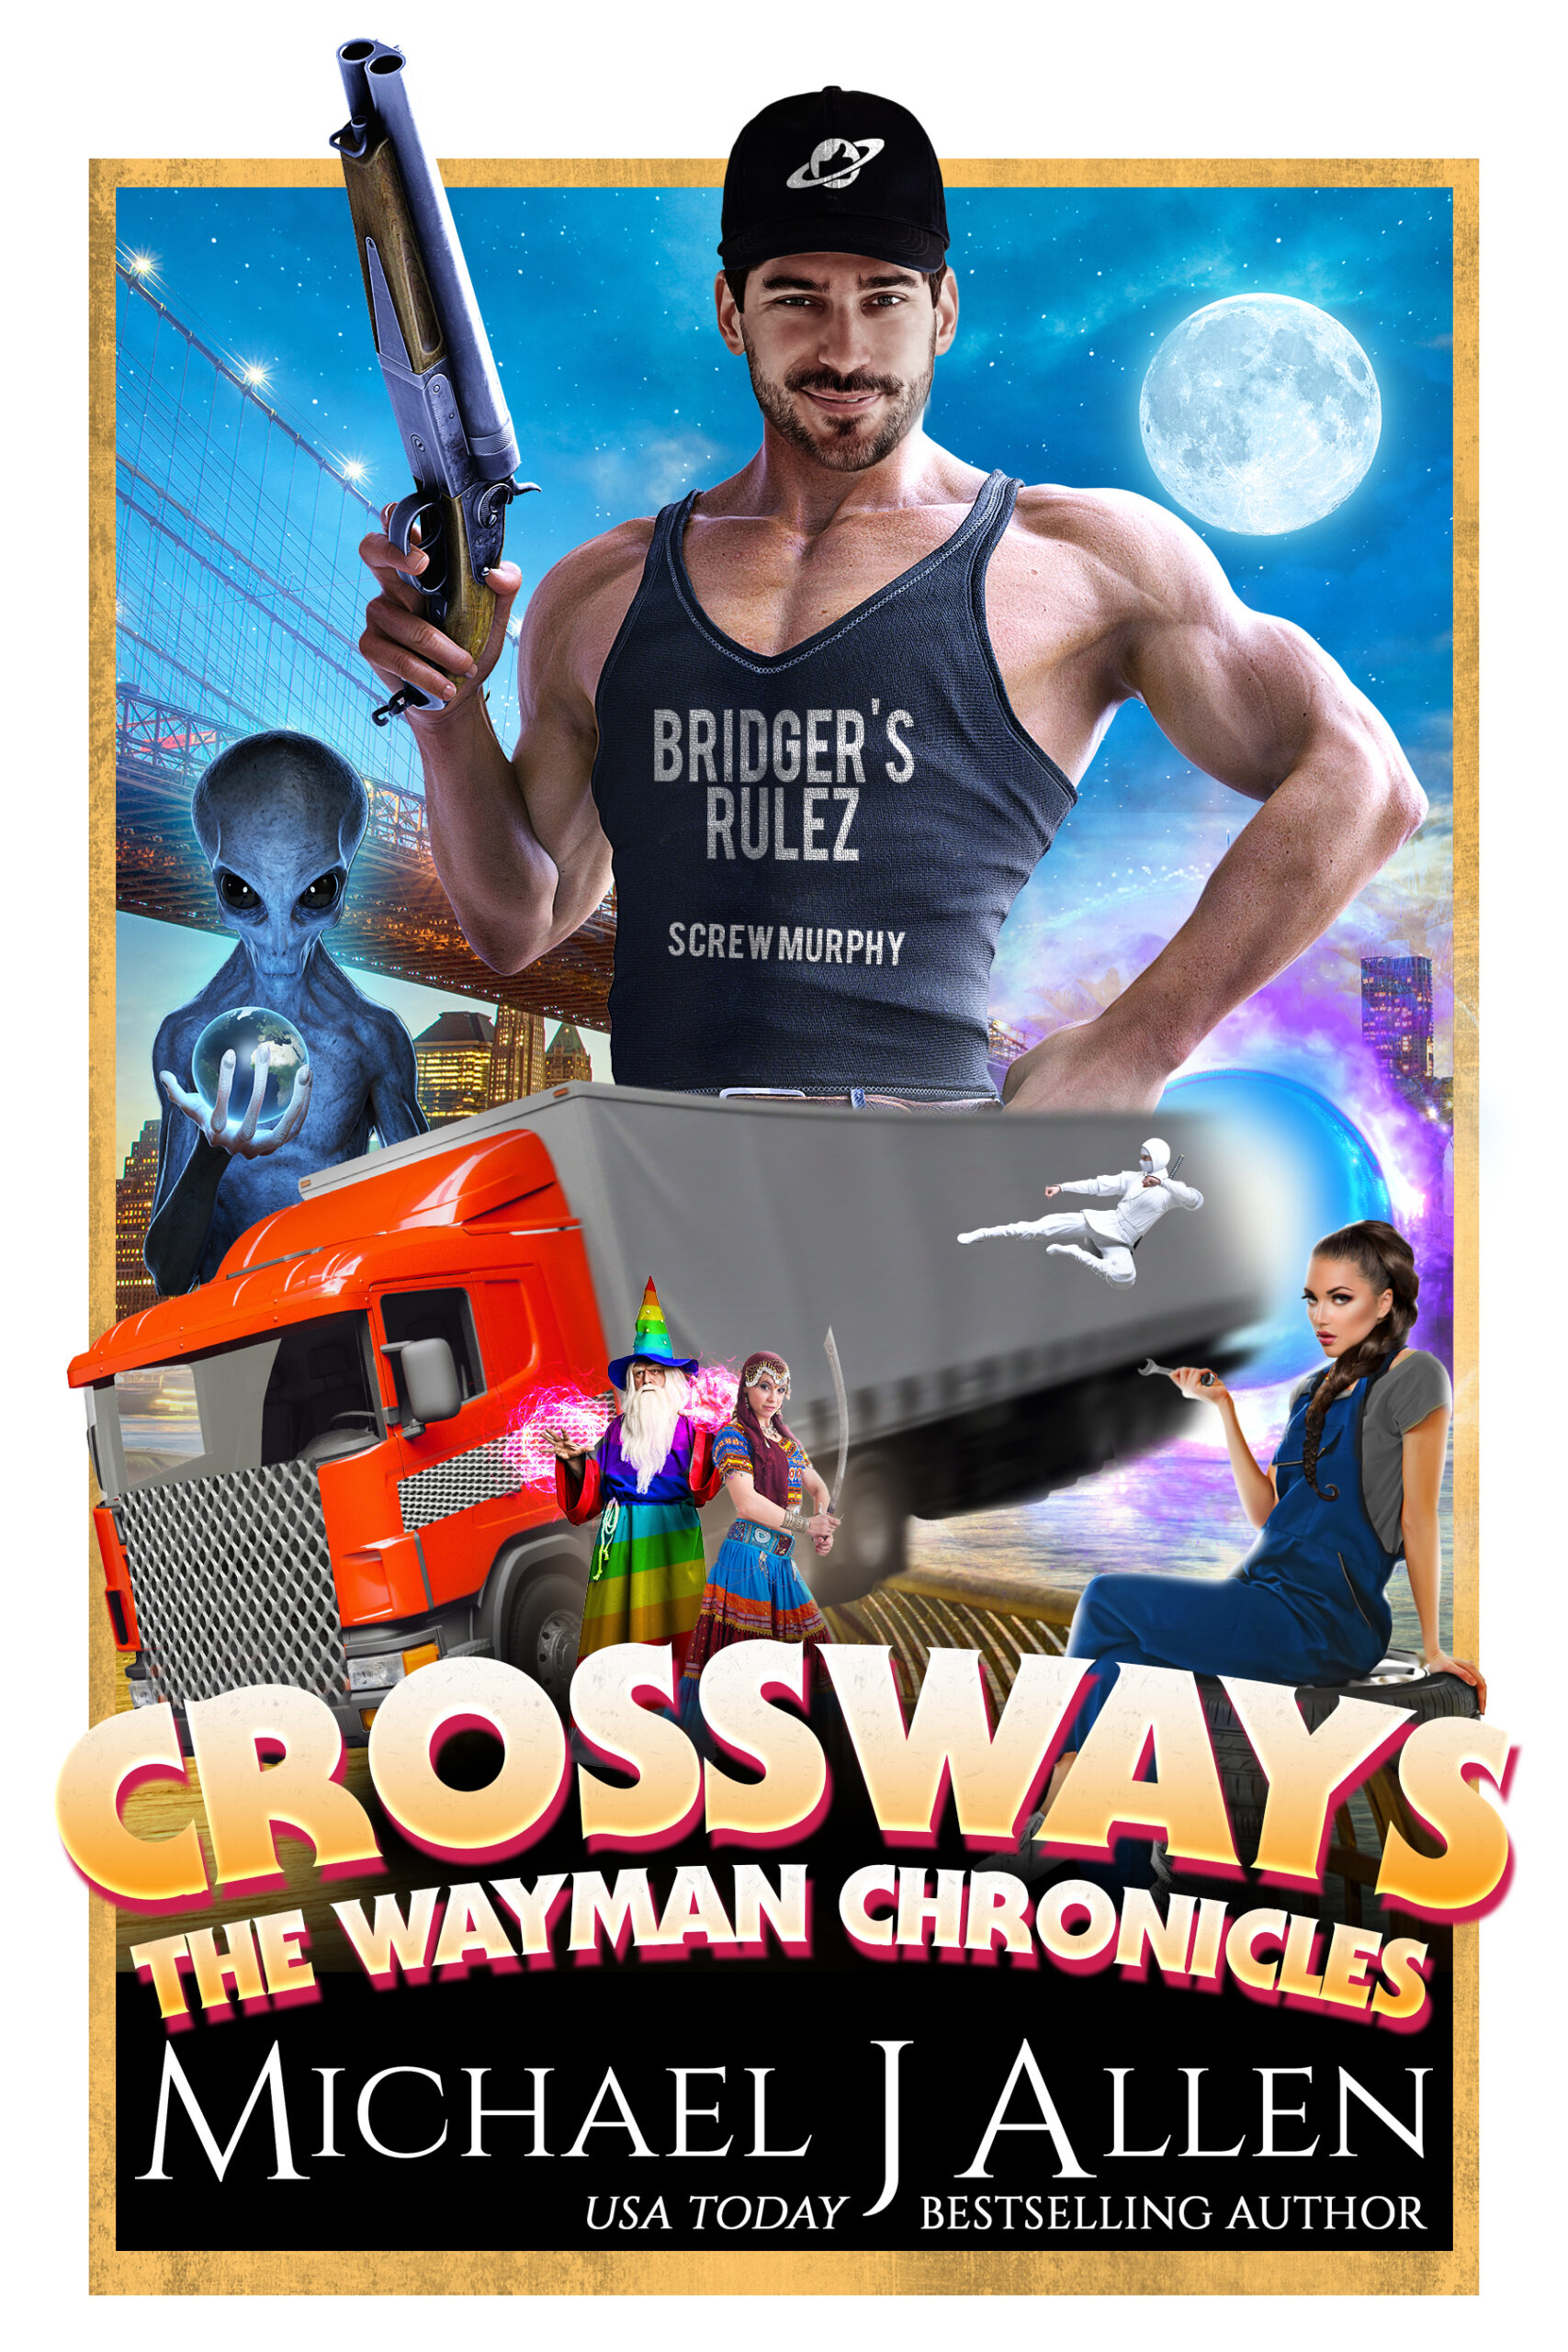 Do you need a good laugh? You’ll want to check out Crossways, our latest release?